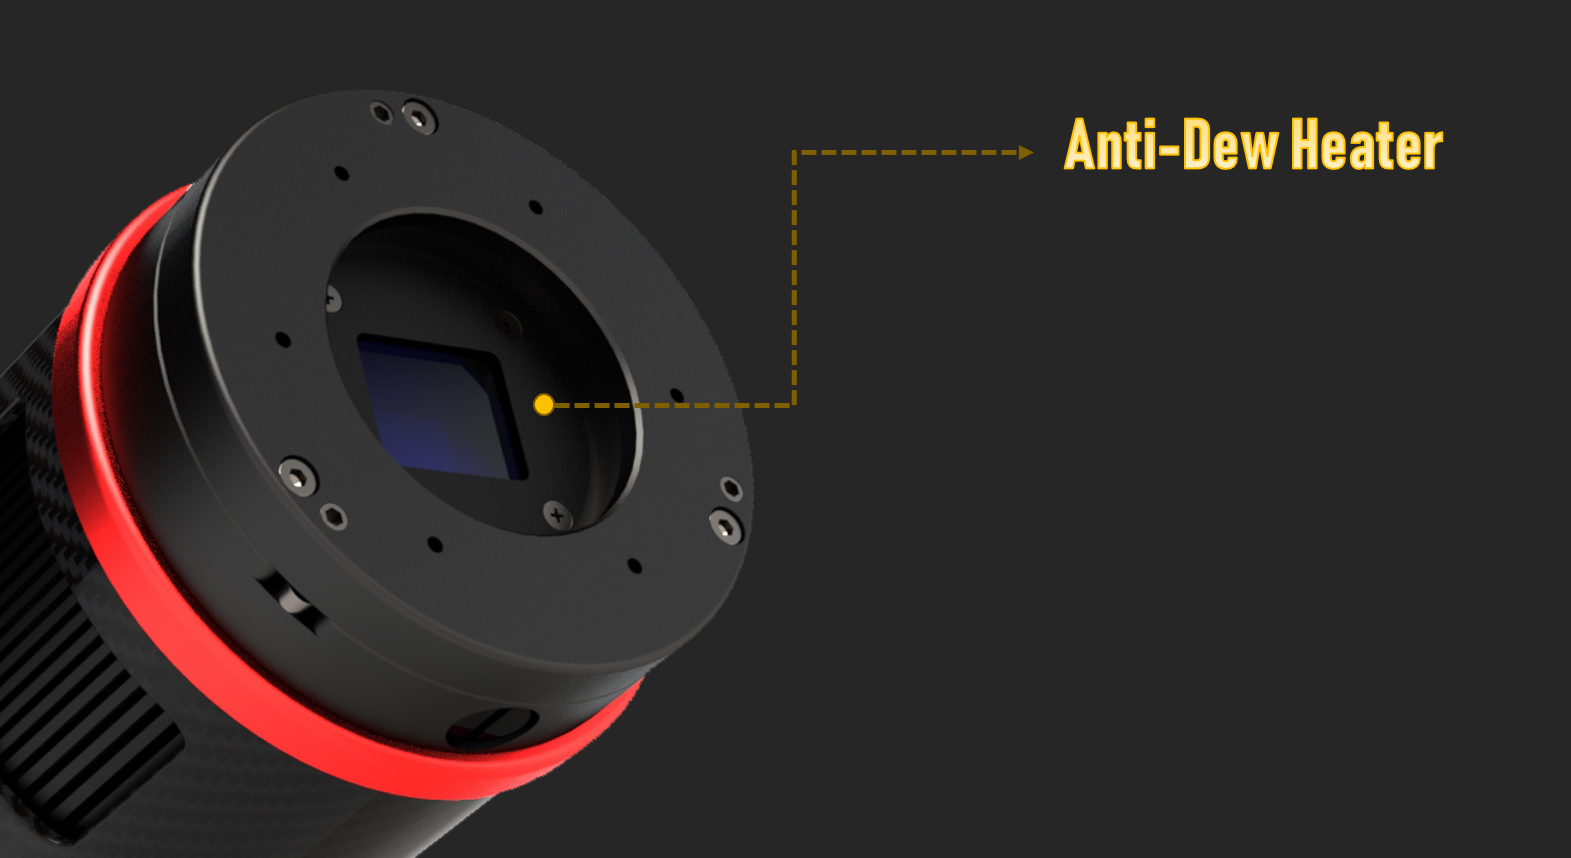   DSO cooled camera line is the most advanced product line in Player One history. [EN]  